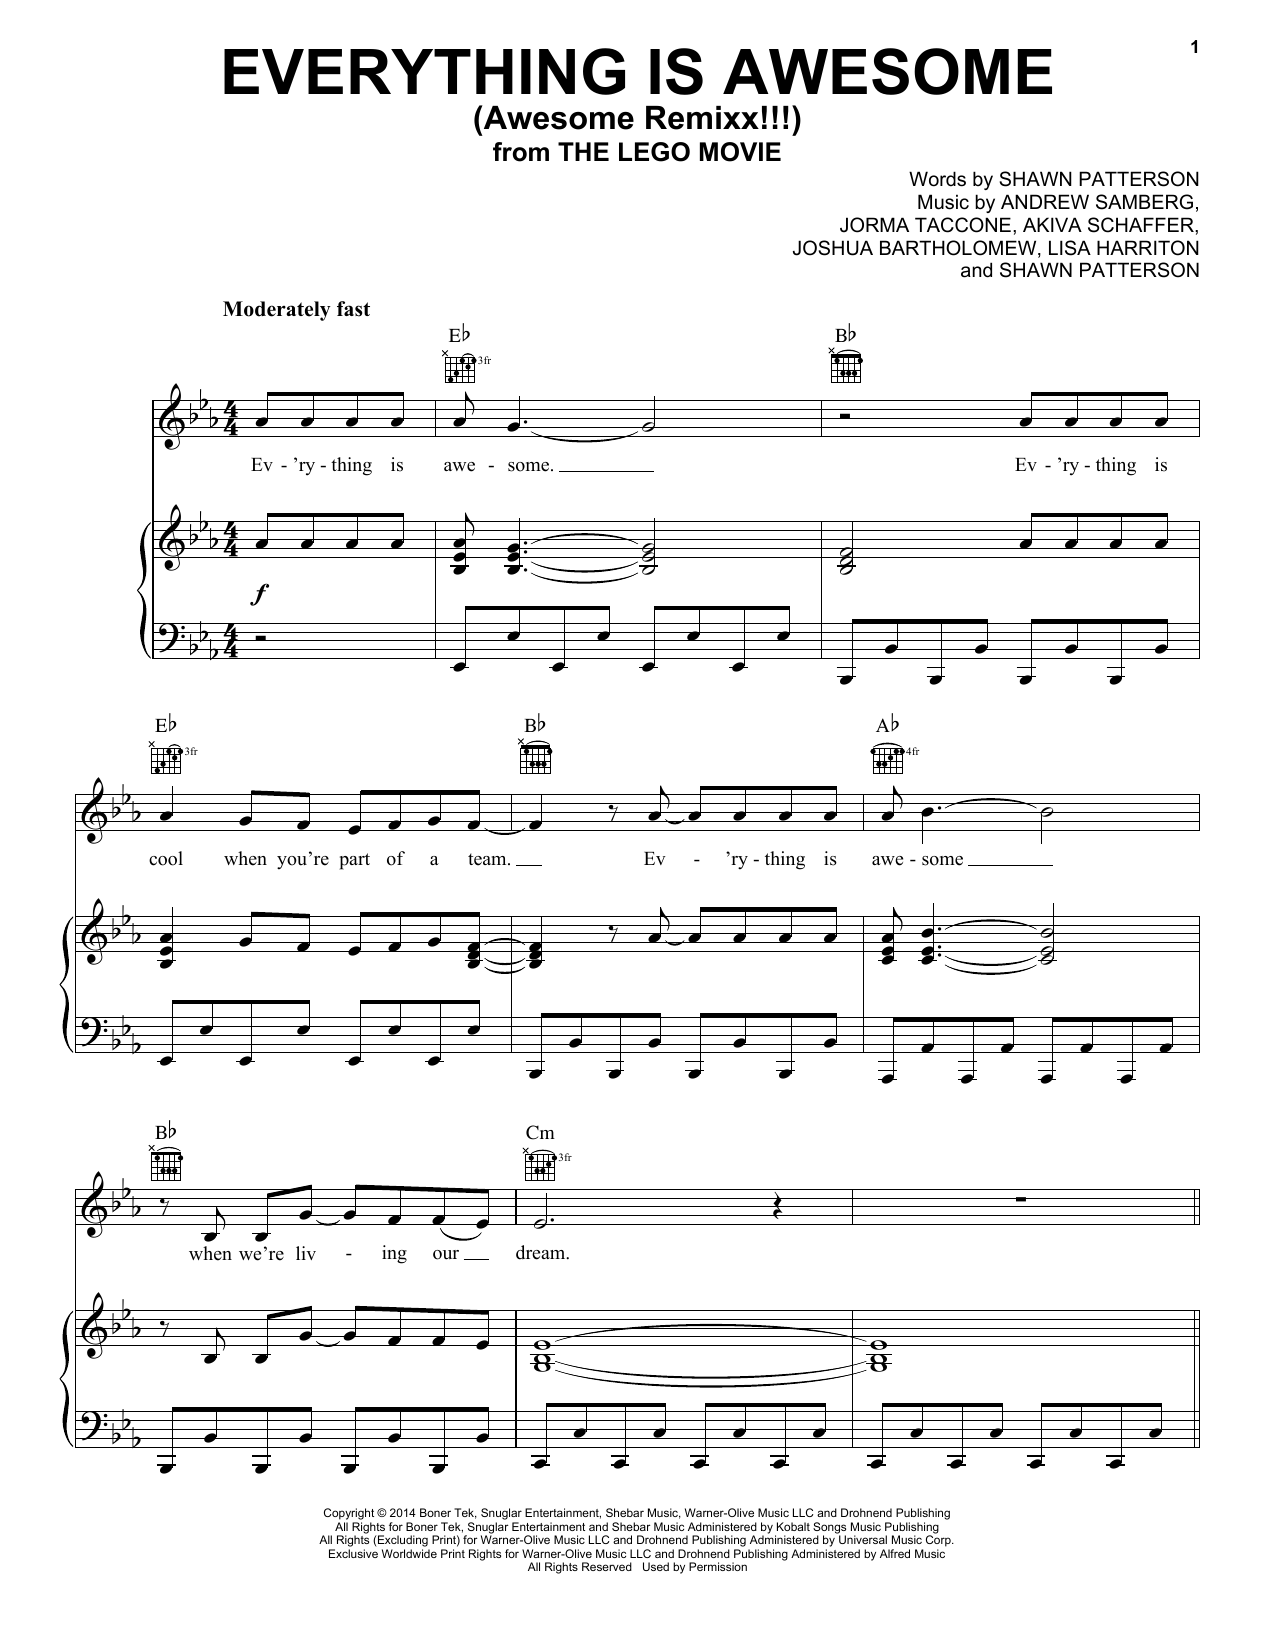 Download Tegan and Sara Everything Is Awesome (feat. The Lonely Sheet Music